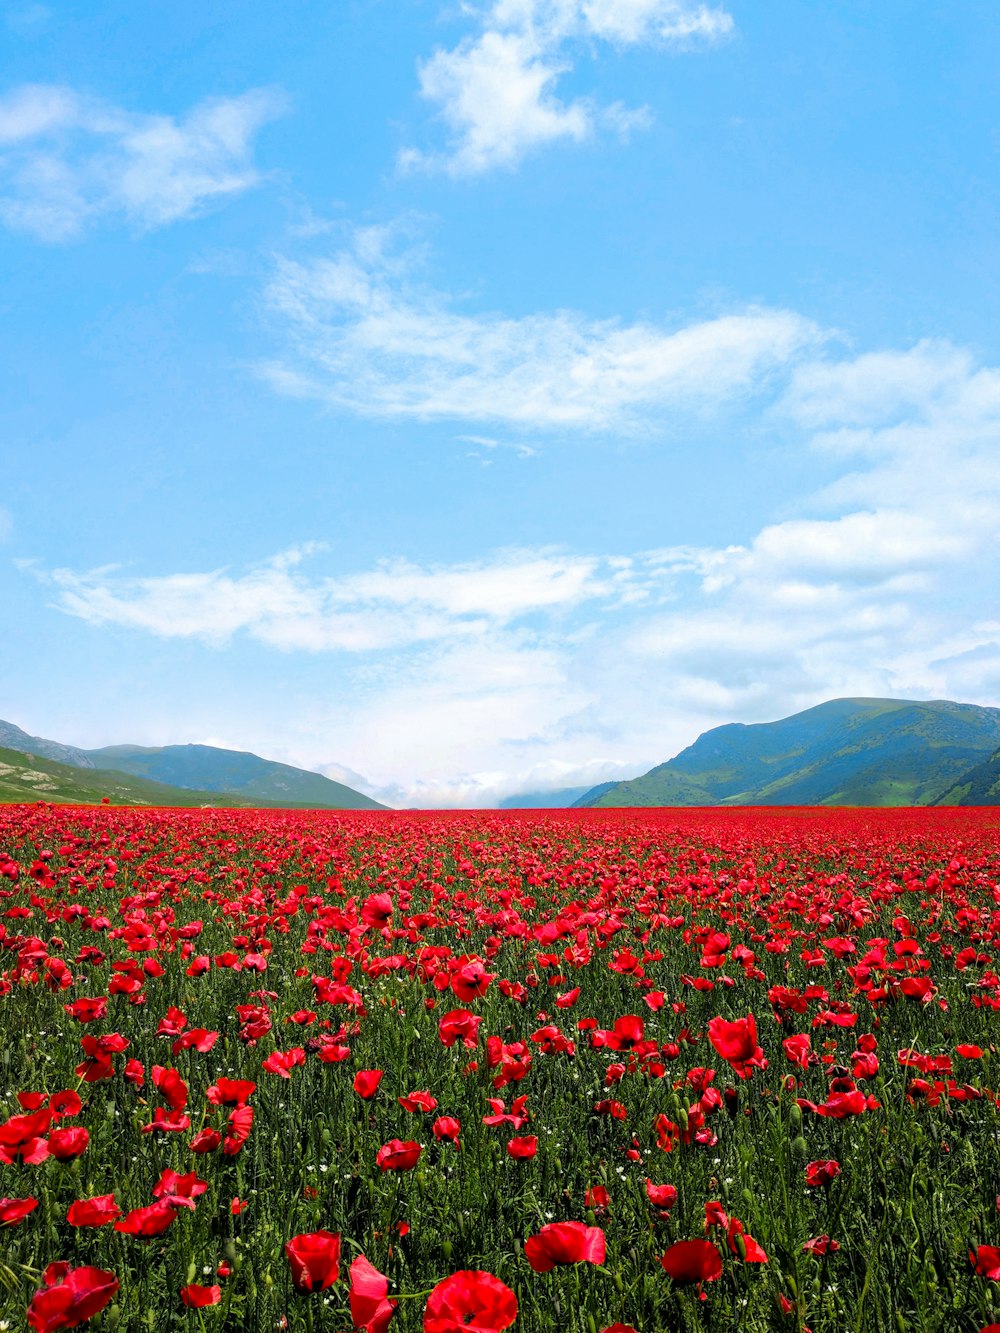 500 Flower Field Pictures Hd Download Free Images On Unsplash The best gifs are on giphy. 500 flower field pictures hd